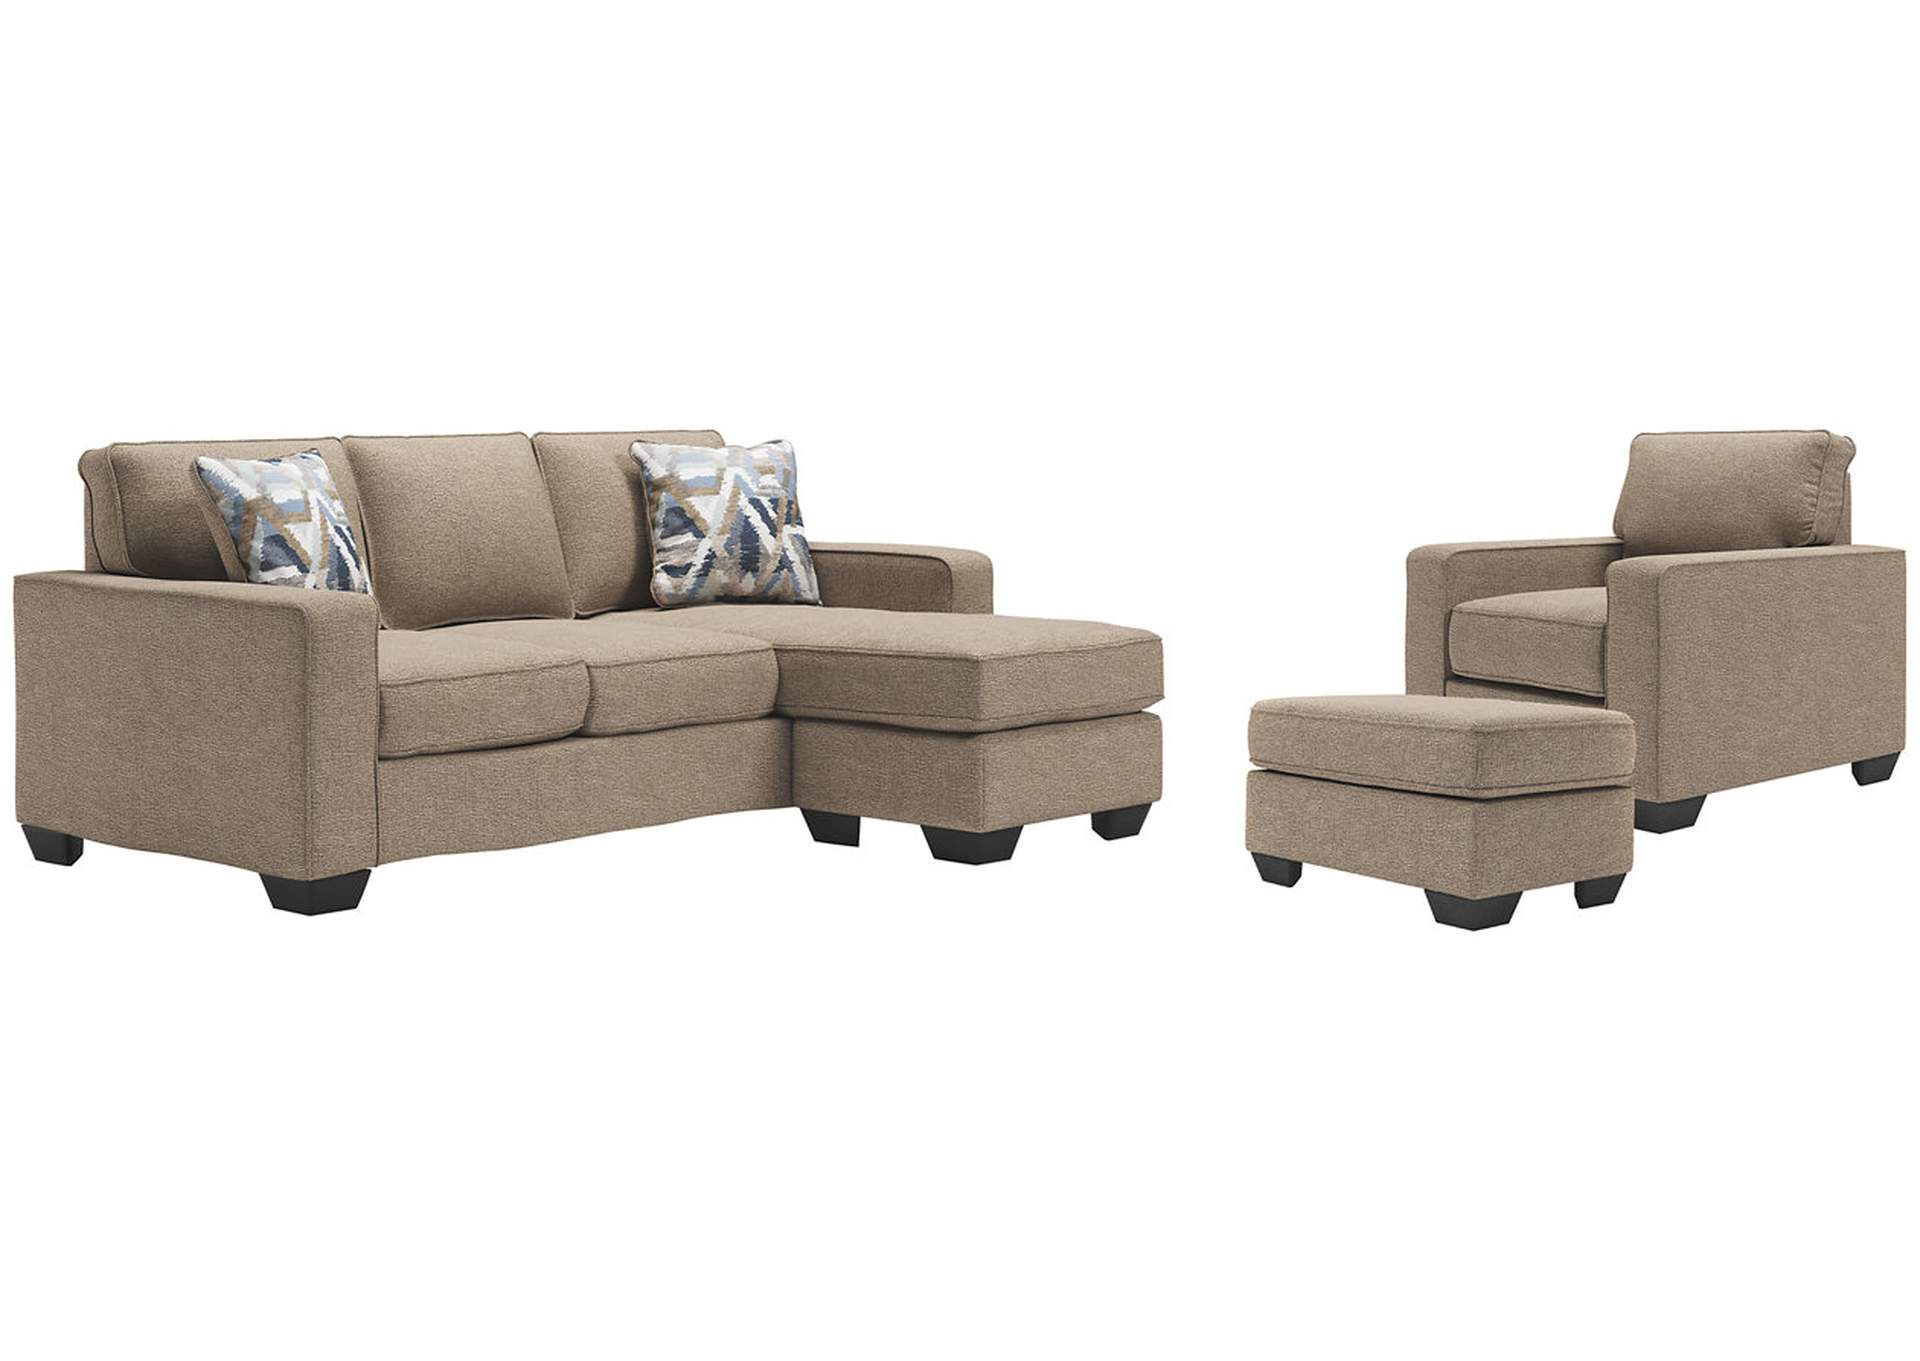 Greaves Sofa Chaise, Chair, and Ottoman,Signature Design By Ashley